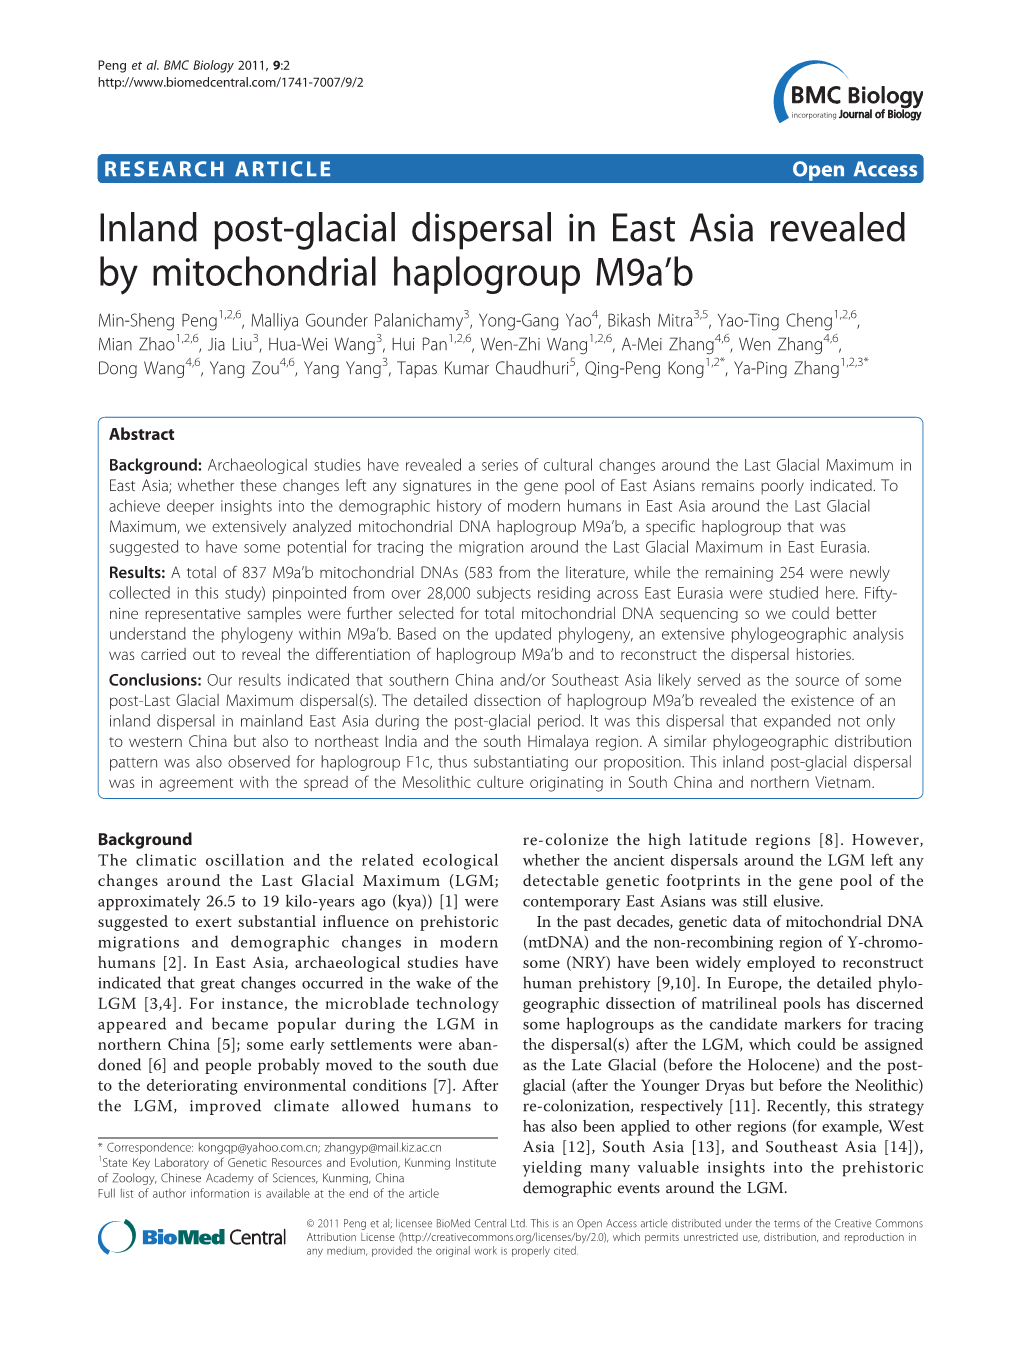 Inland Post-Glacial Dispersal in East Asia Revealed by Mitochondrial